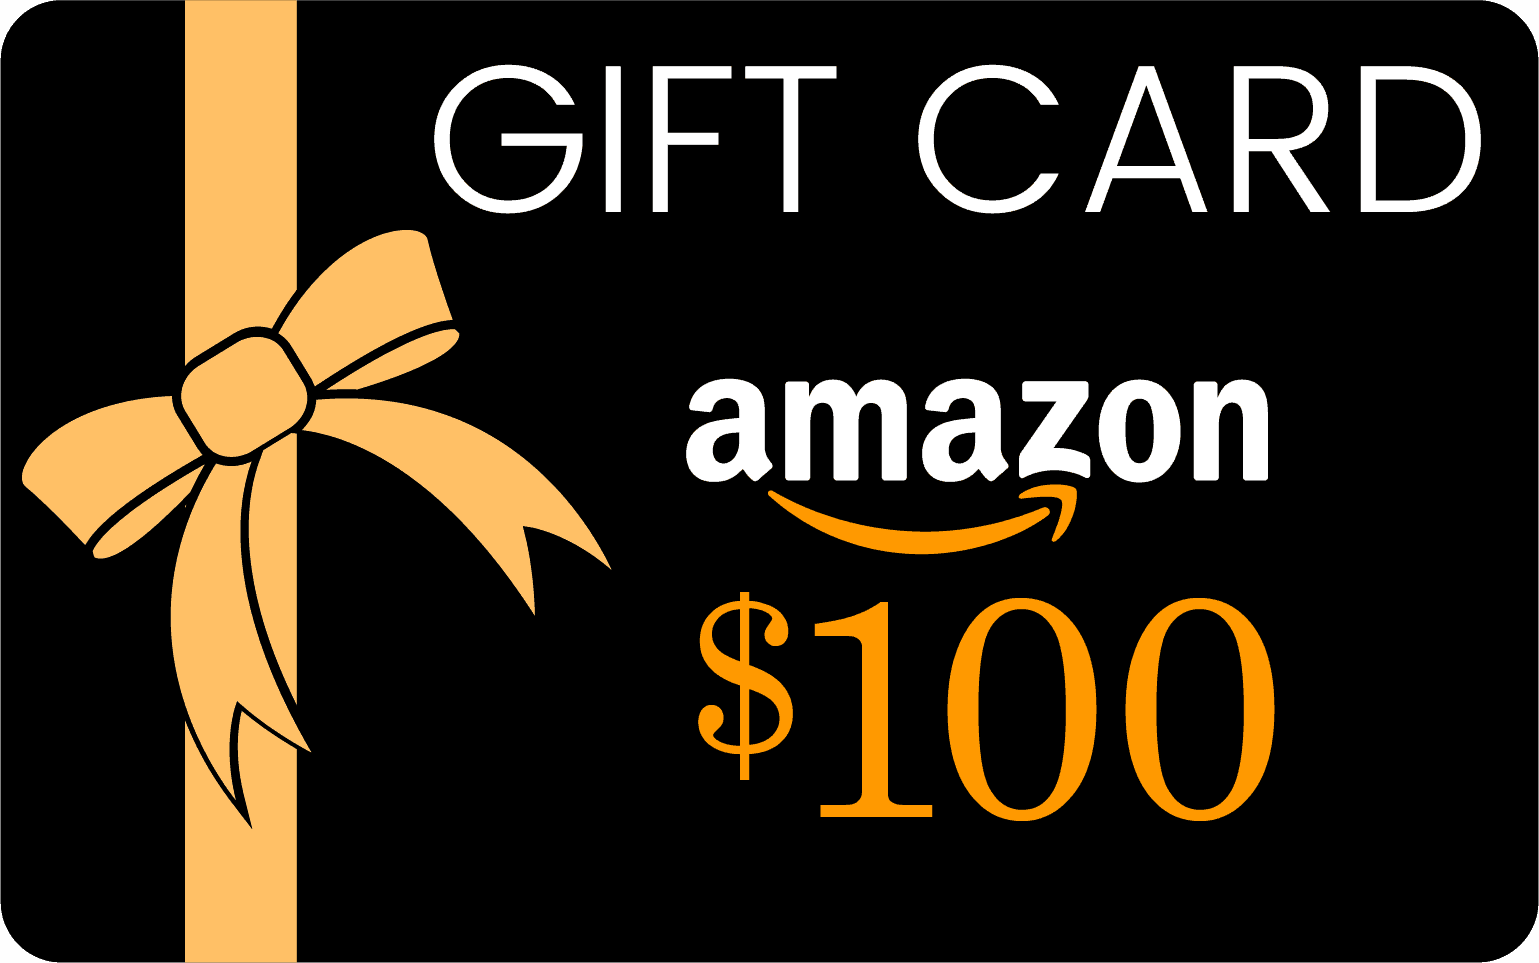 Amazon gift card prize for winning the baking challenge.